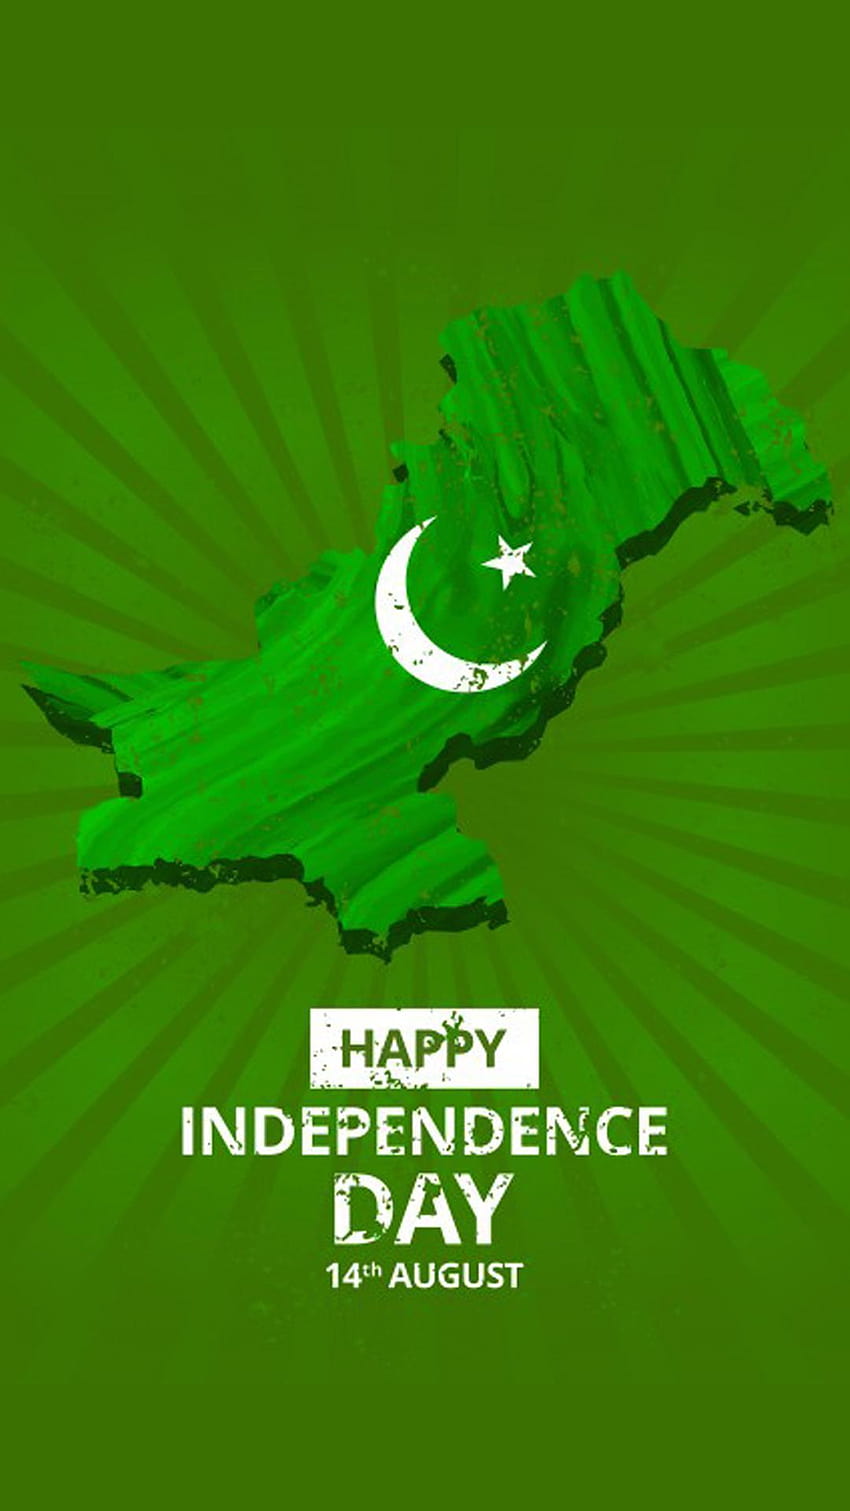 August pakistan independence day 2018 for Android  APK 14 August HD phone  wallpaper  Pxfuel